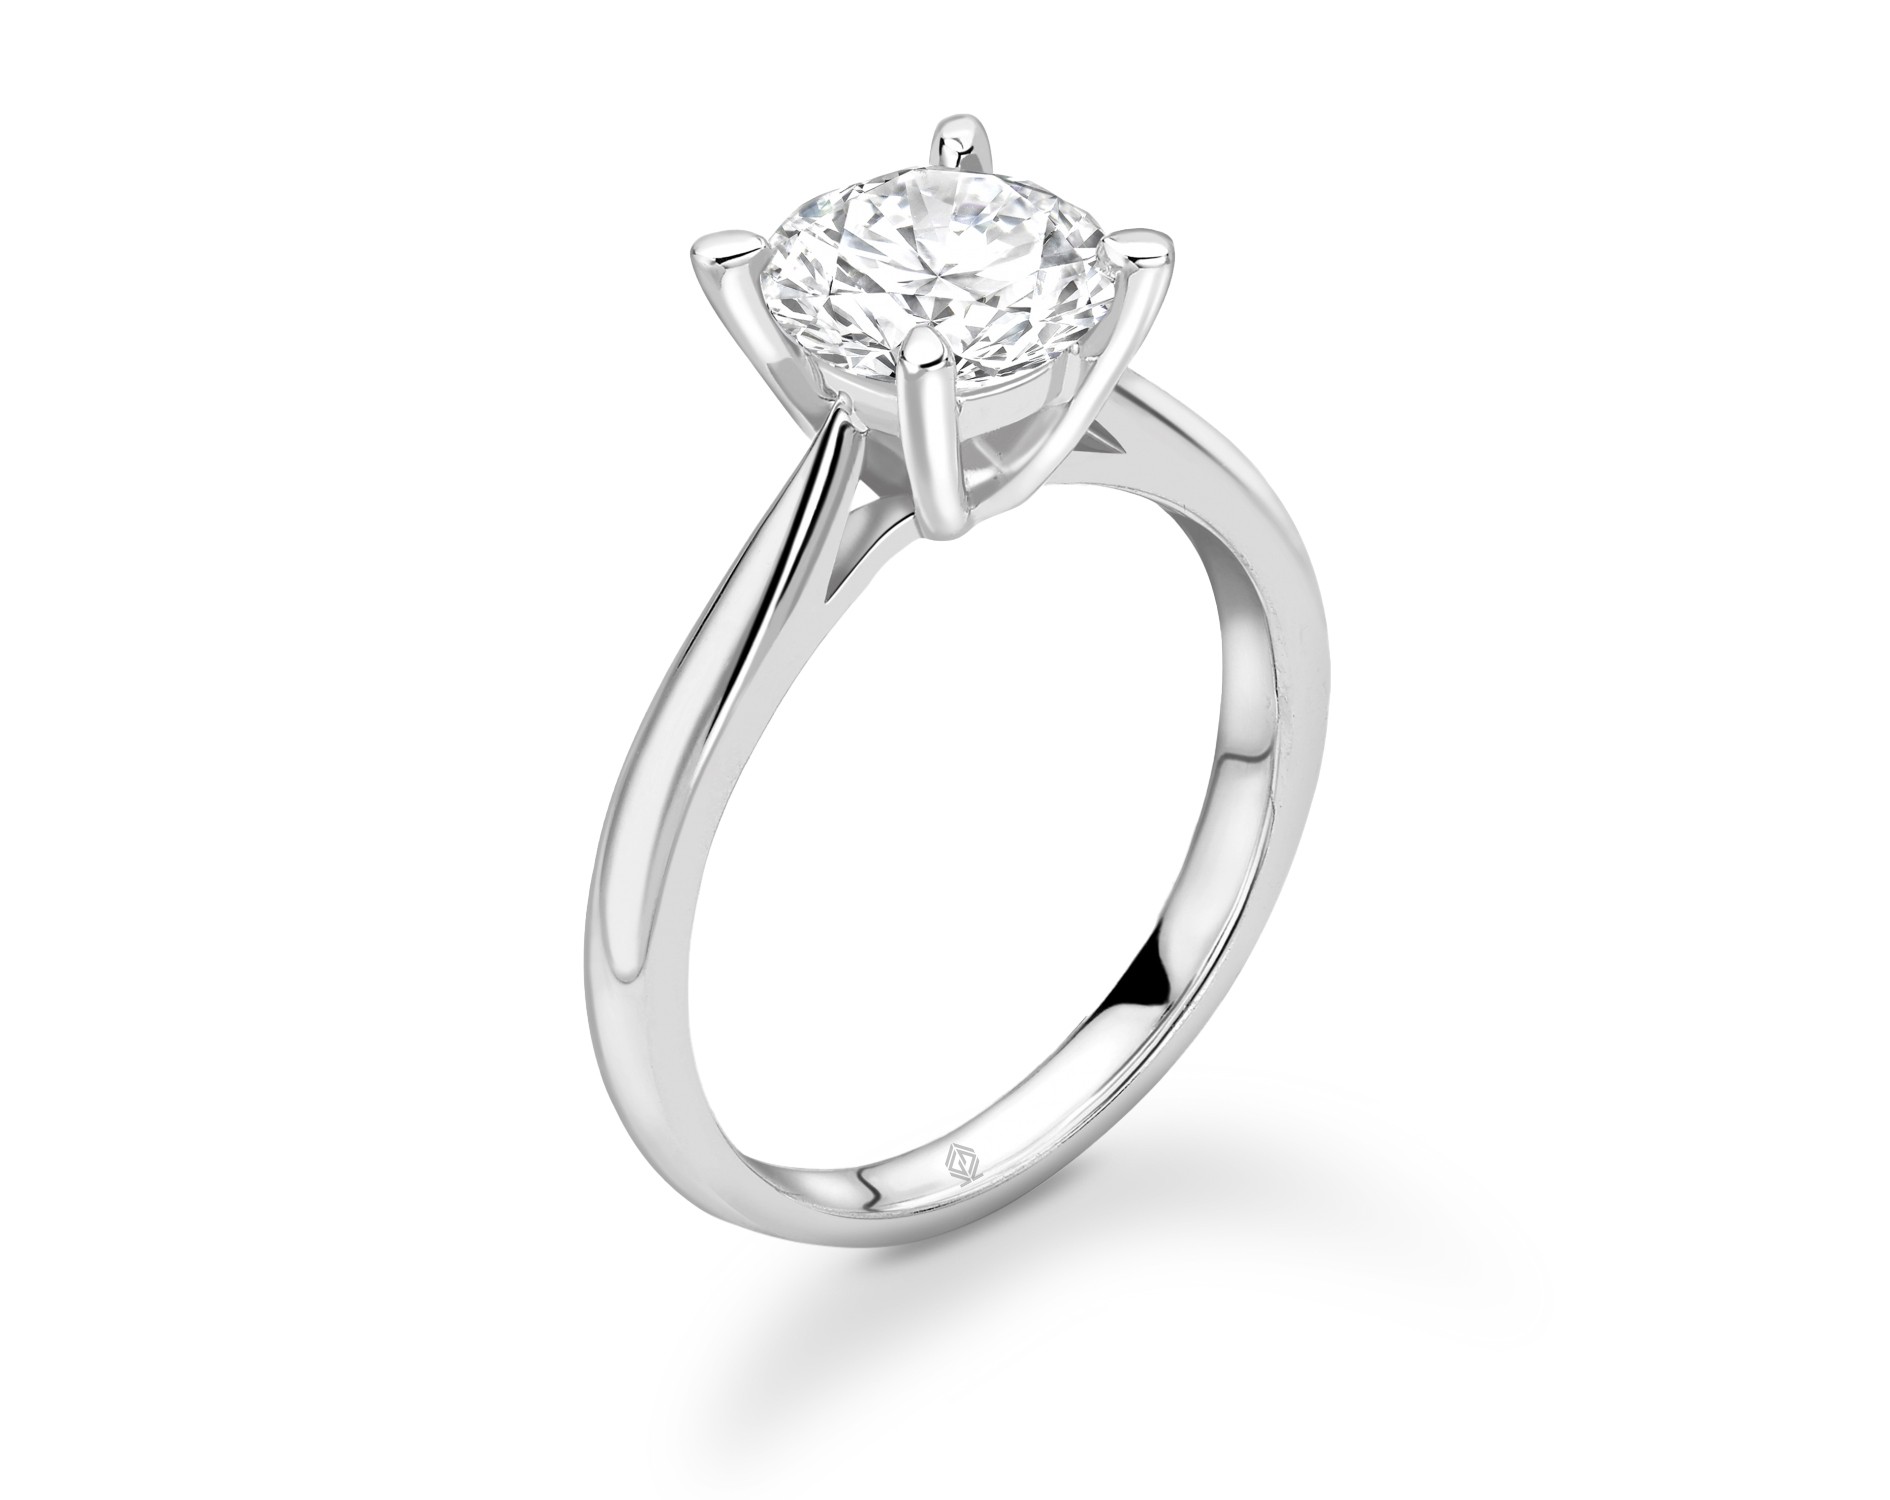 18K WHITE GOLD 4 PRONGS SOLITAIRE ROUND CUT DIAMOND WITH YELLOW GOLD SHANK ENGAGEMENT RING